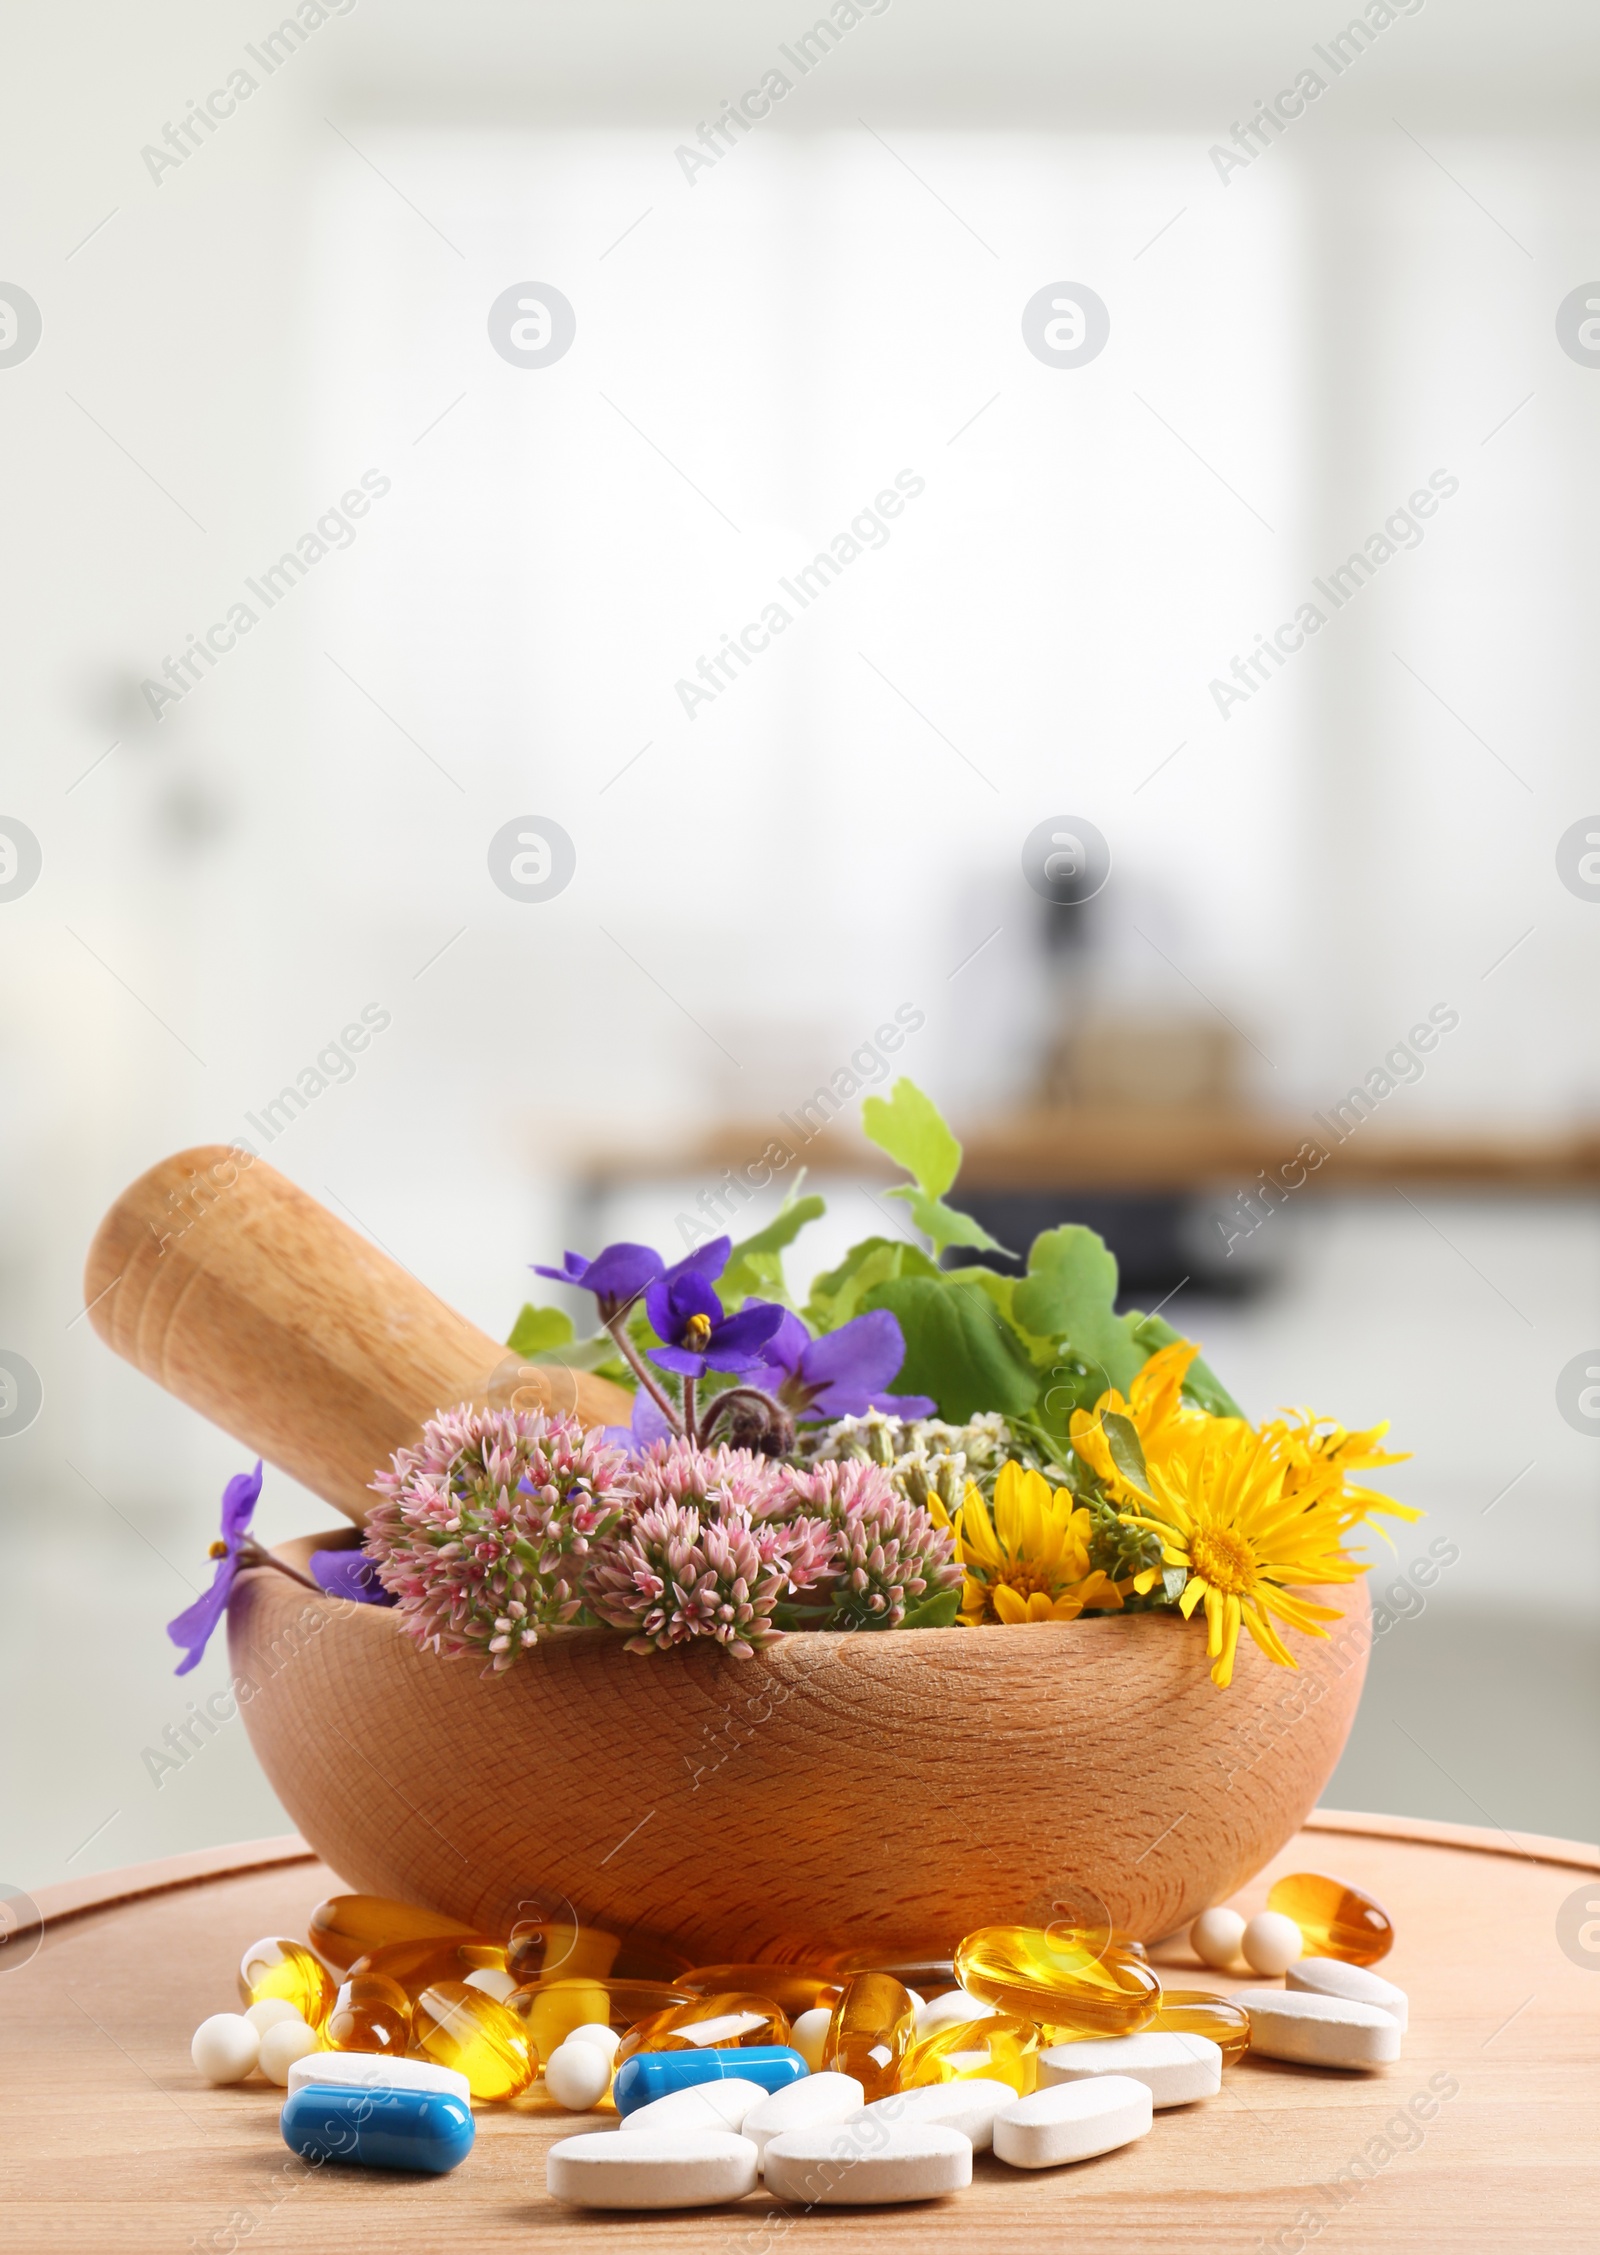 Image of Mortar, fresh herbs and pills on wooden board in medical office